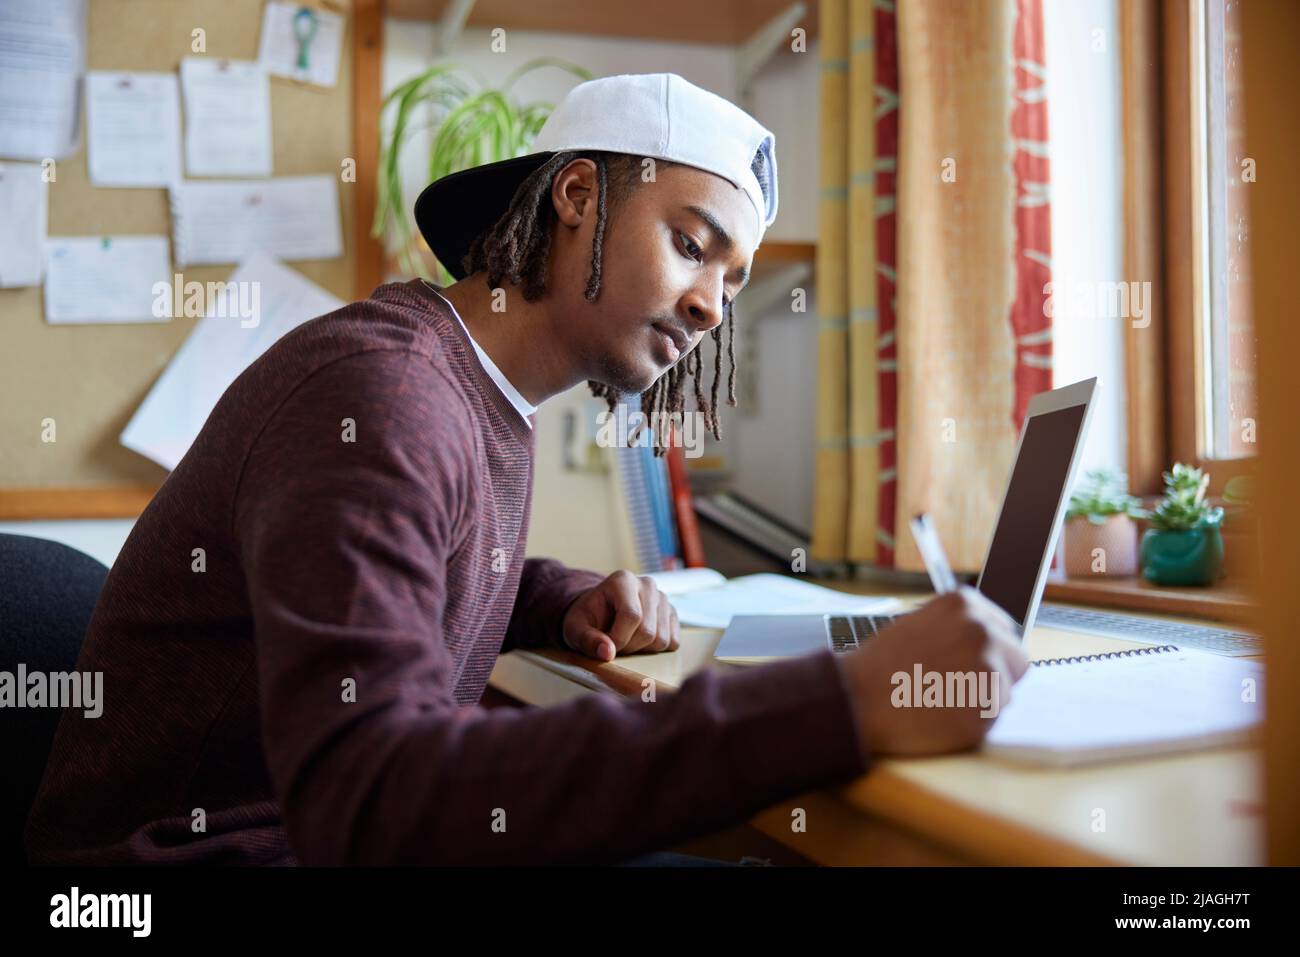 Male University Or College Student Wearing Baseball Cap Studying With Laptop At Desk In Room Stock Photo